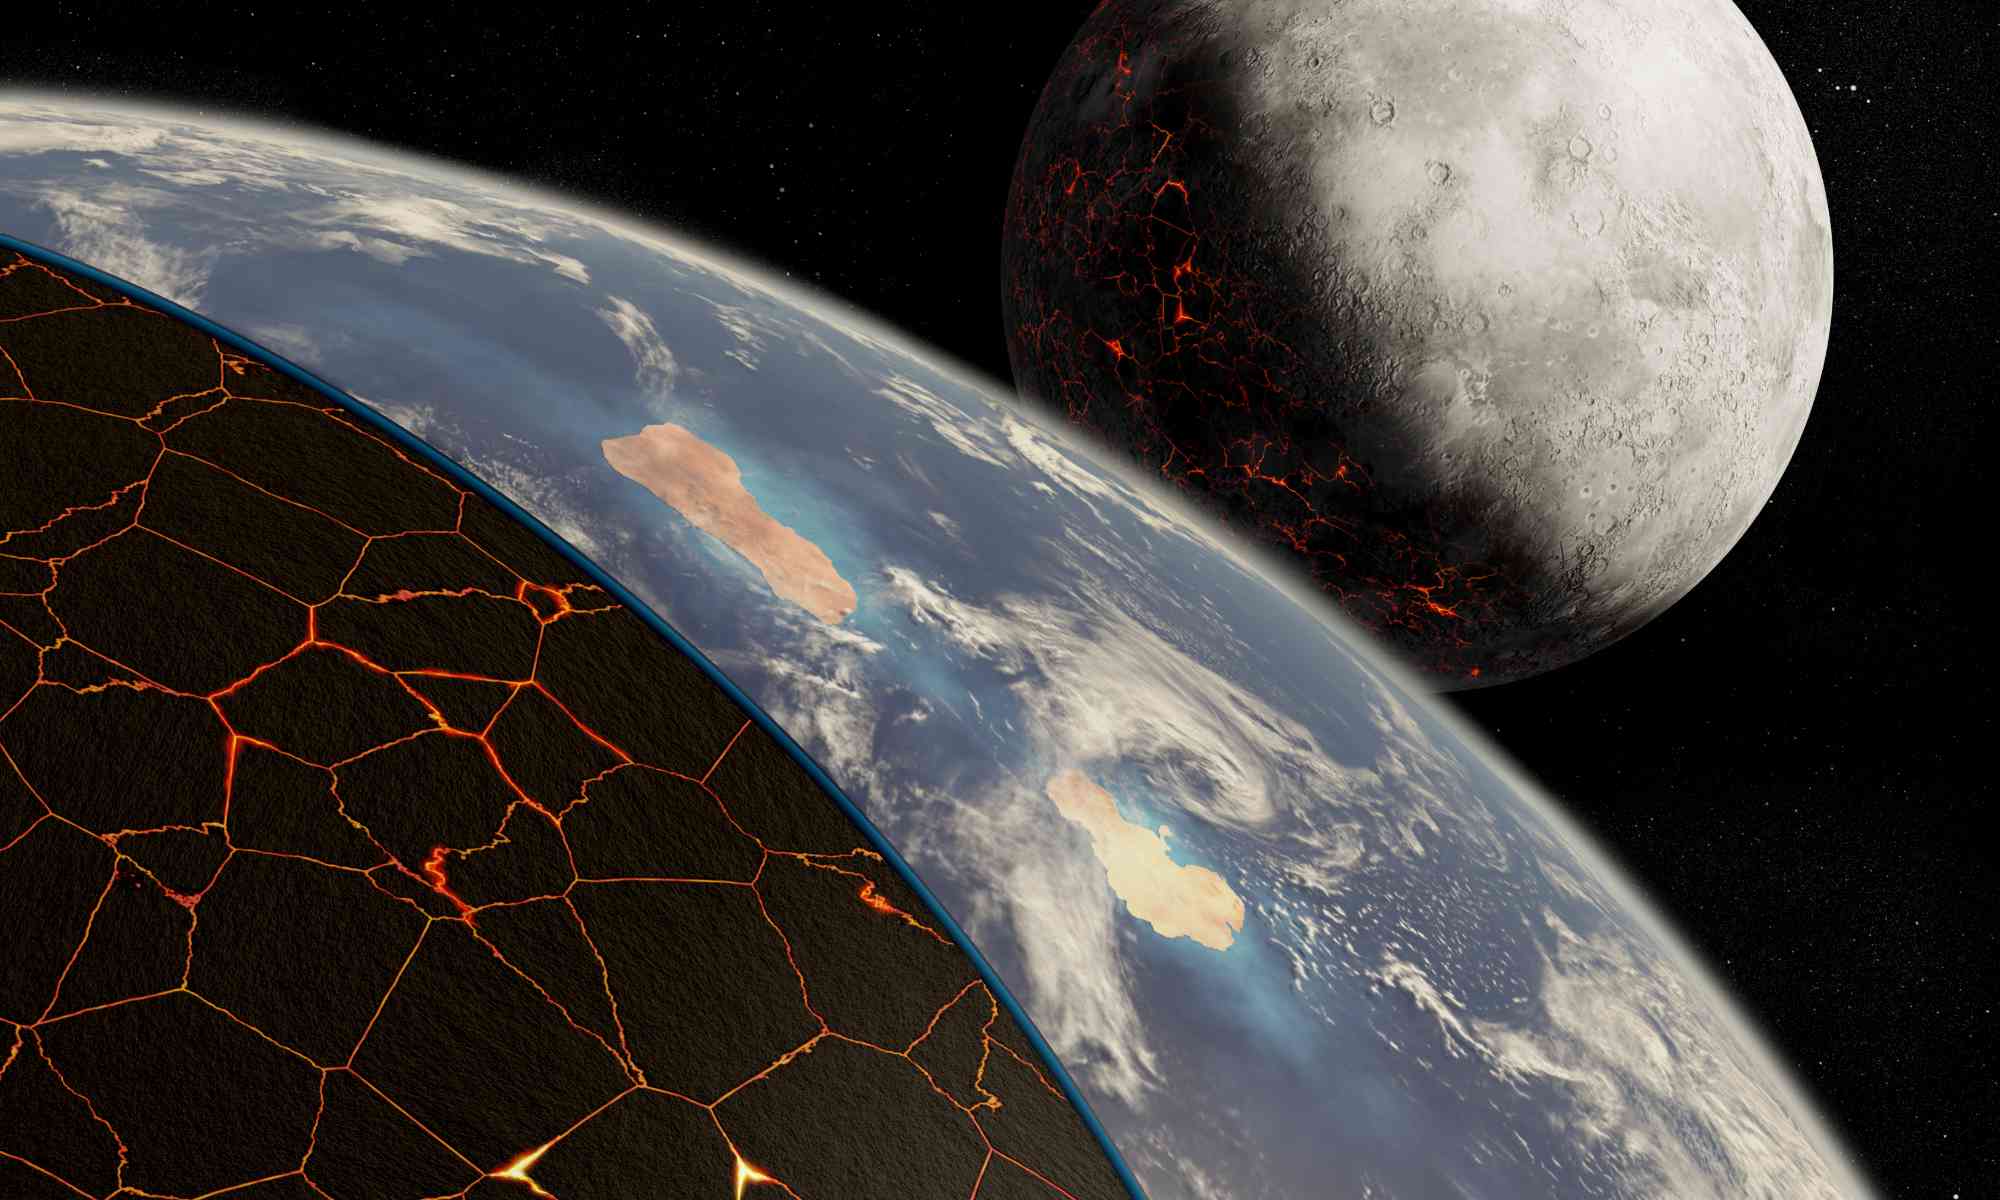 Artist's rendering of planet Earth with top layer removed to reveal underlying plate tectonics, seen from space with the moon in the background.